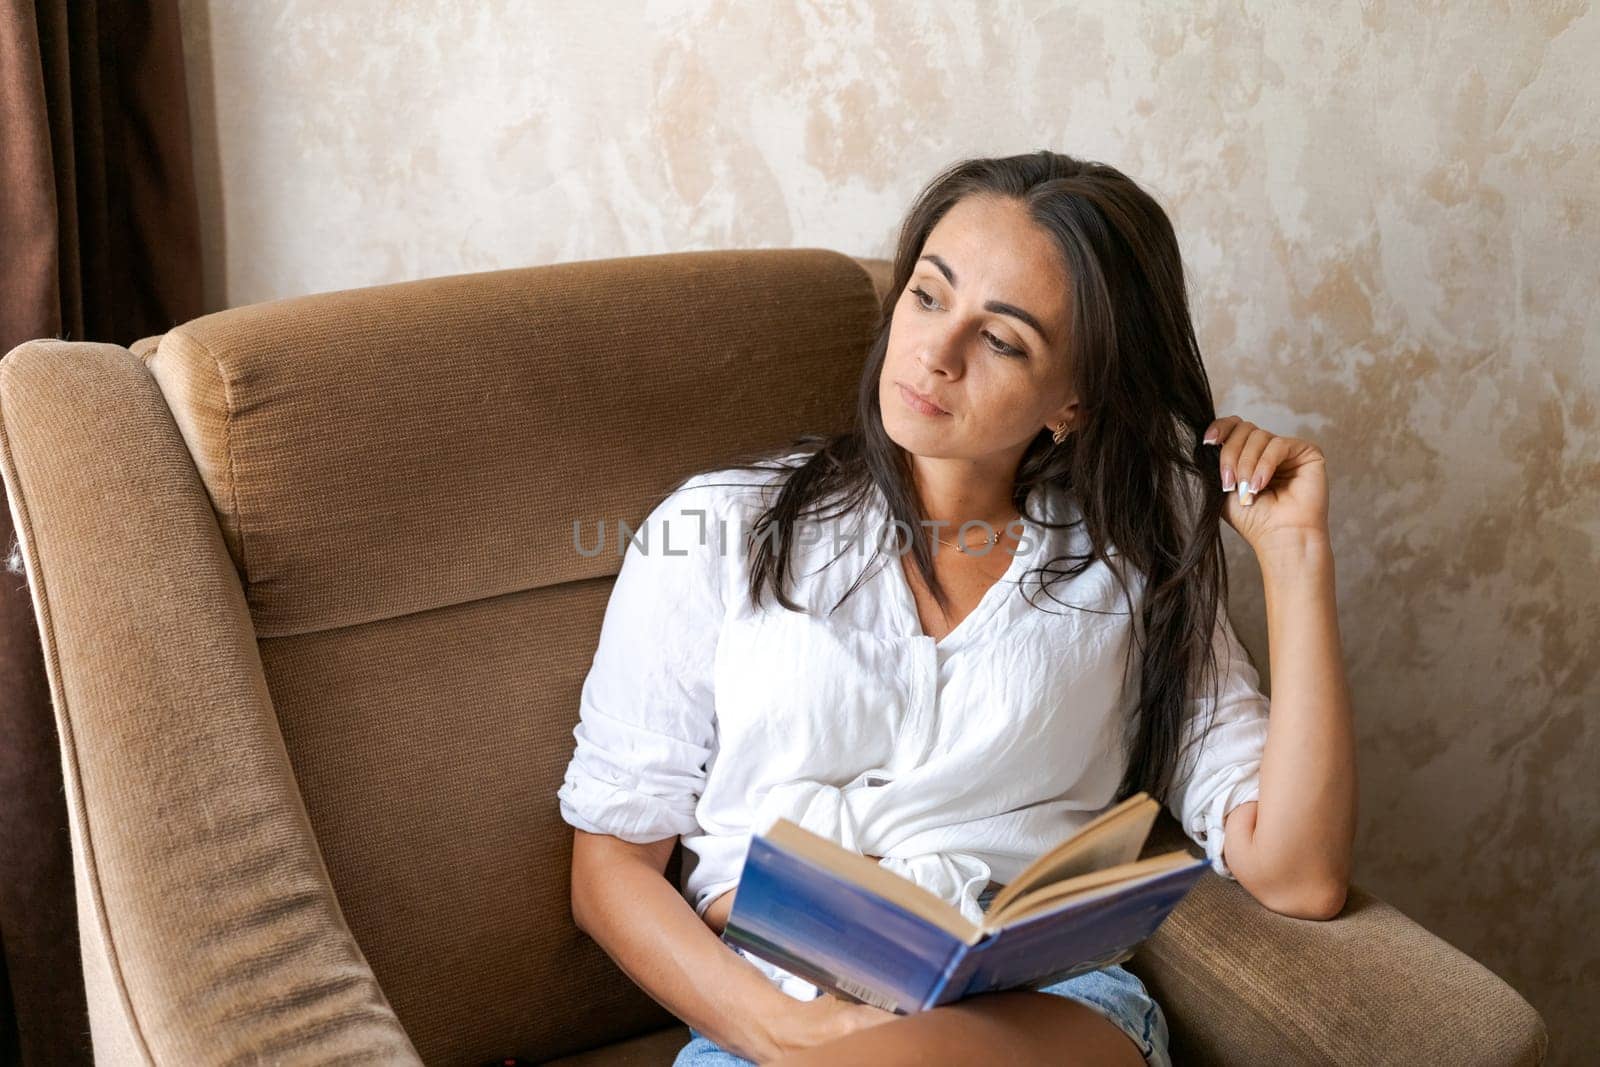 woman sitting on a chair holding a book in her hand, lifestyle concept